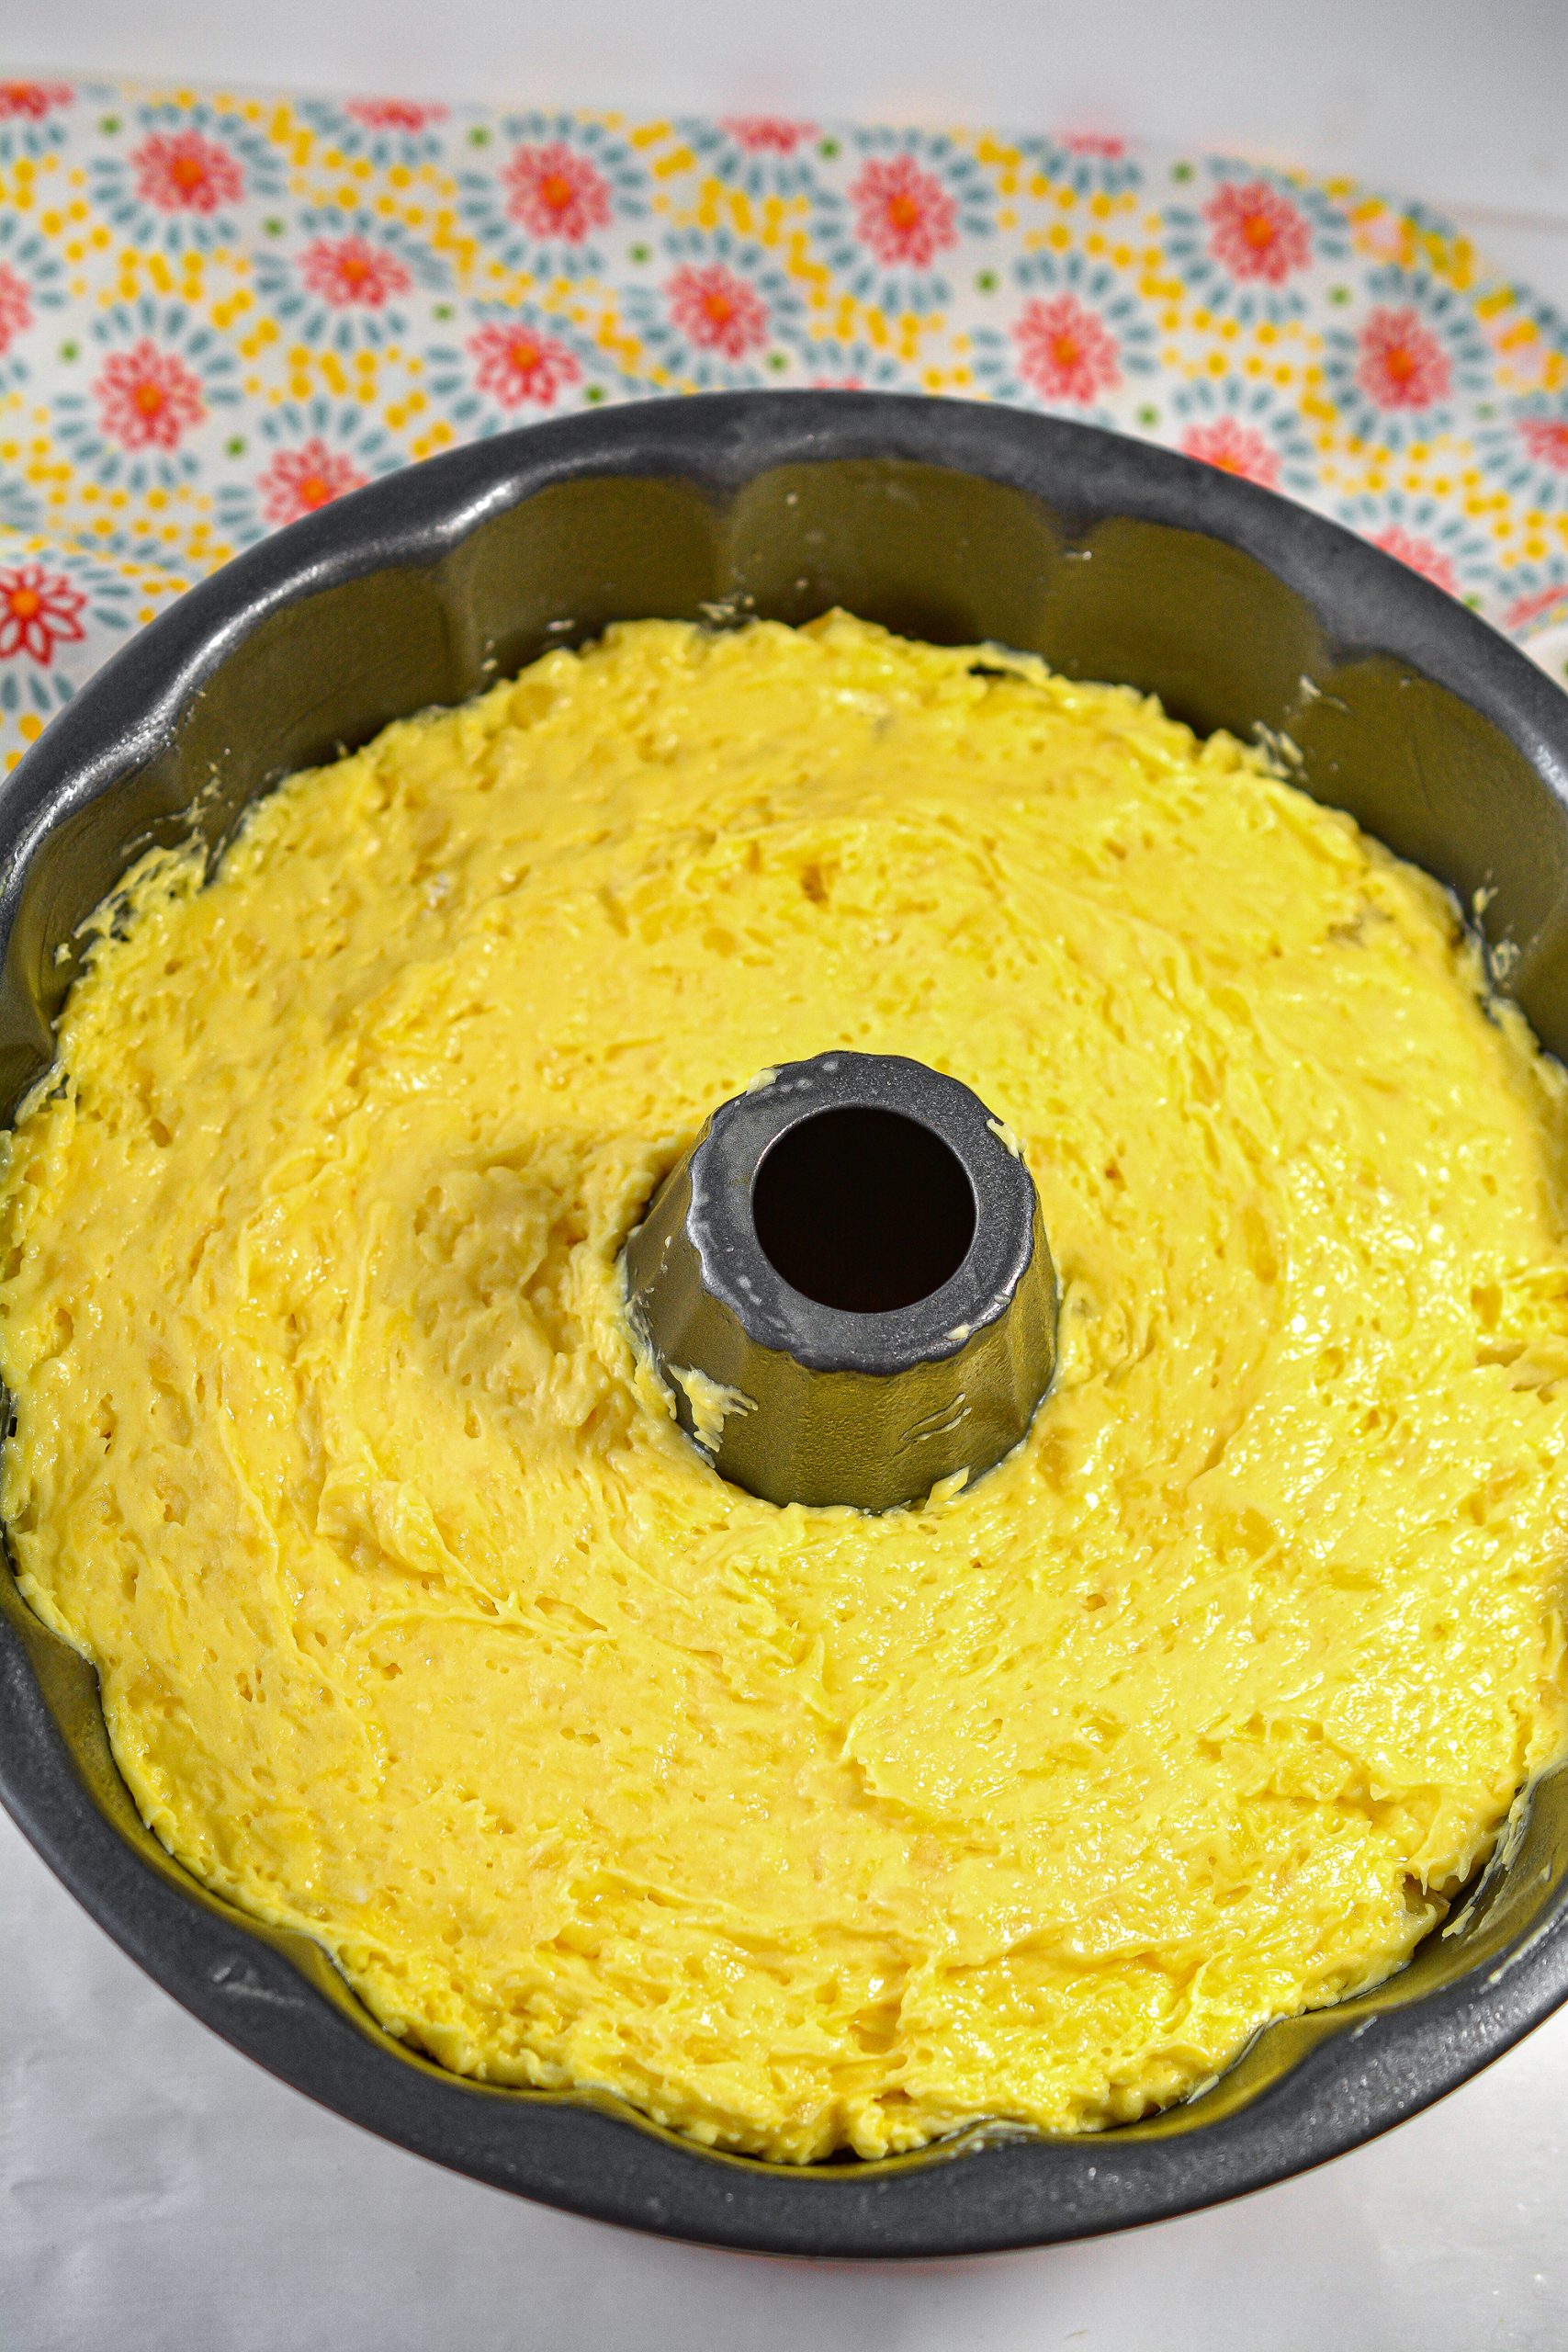 Layer the cake batter over the pineapple slices in the bundt pan.